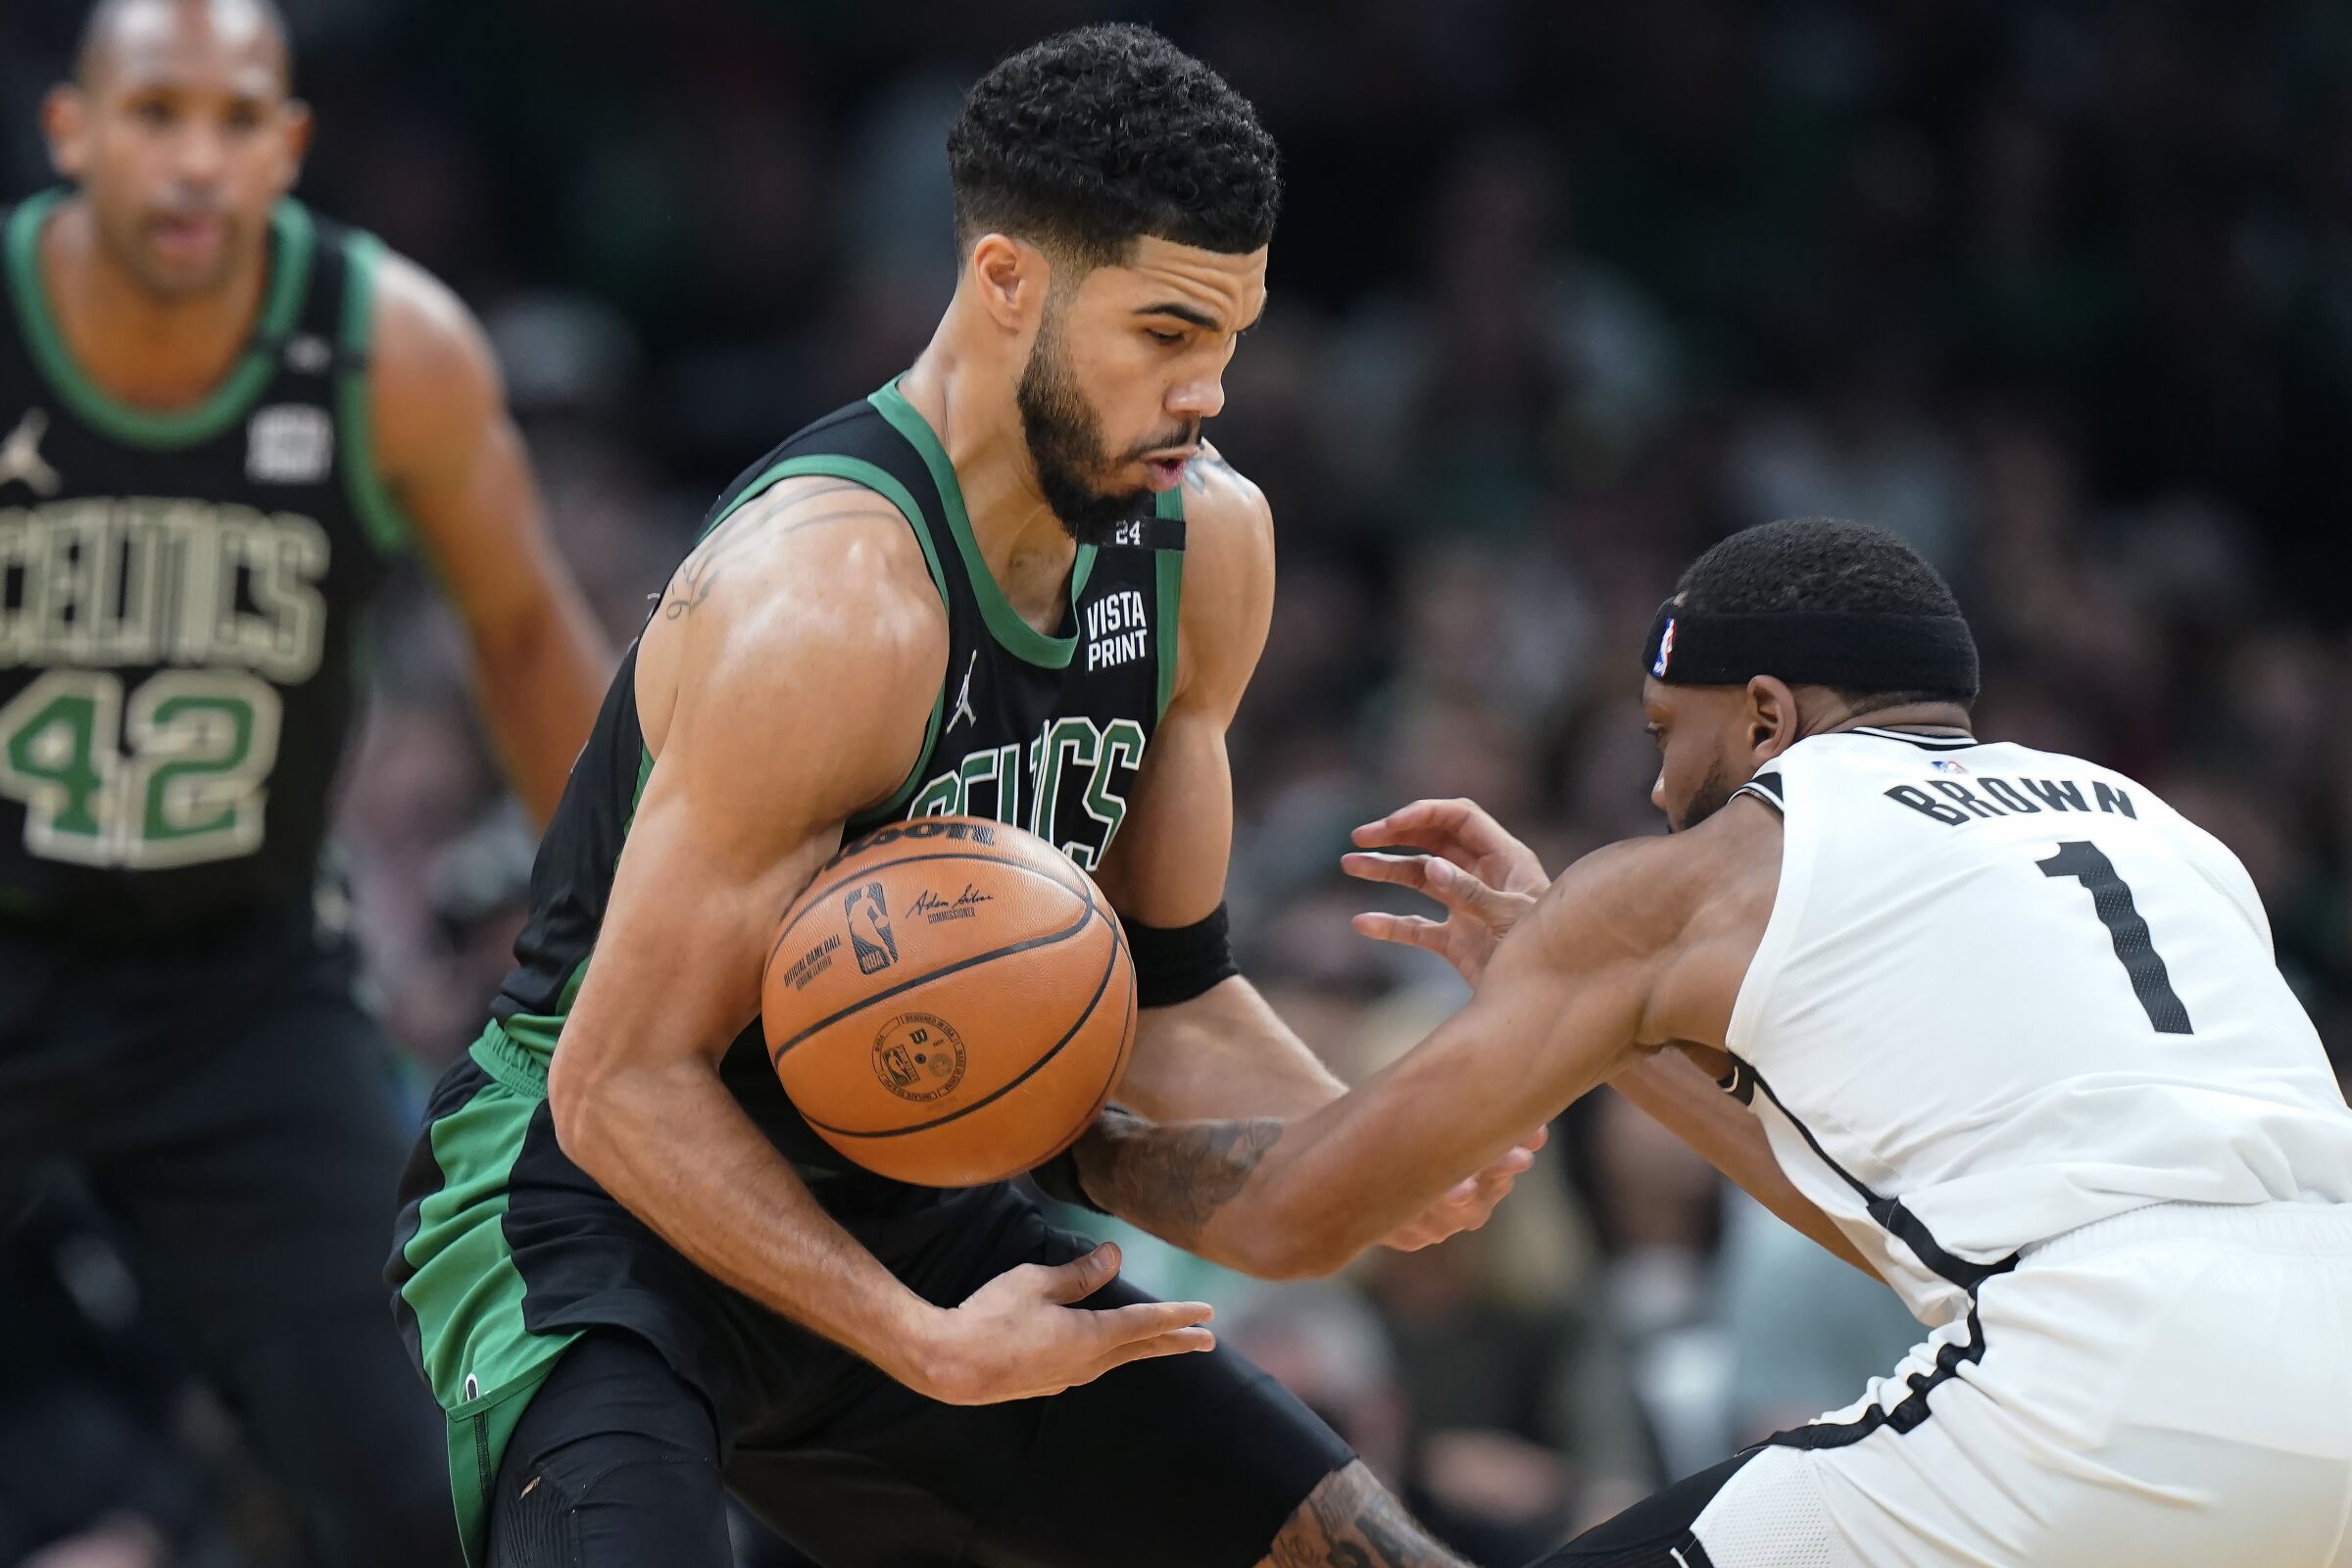 Celtics forward Jayson Tatum grapples with Nets forward Bruce Brown for control of the ball.